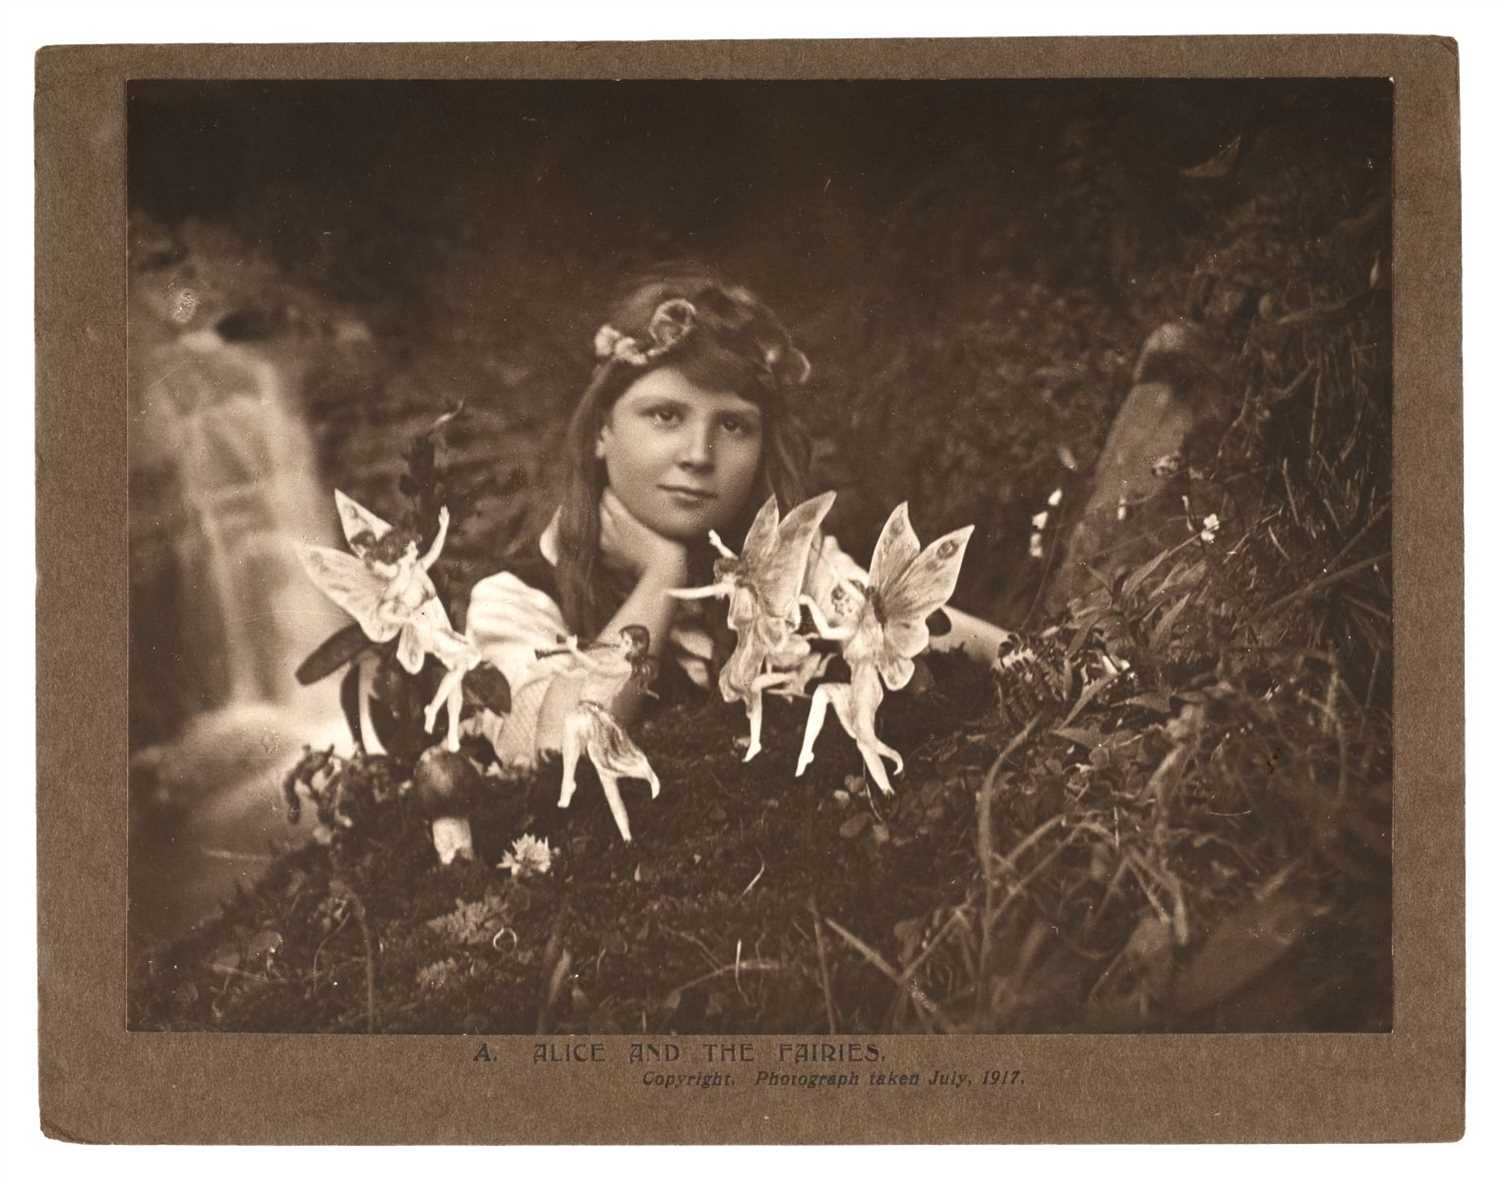 Lot 236 - Cottingley Fairies. Alice and the Fairies, photograph of Frances 'Alice' Griffiths, July 1917